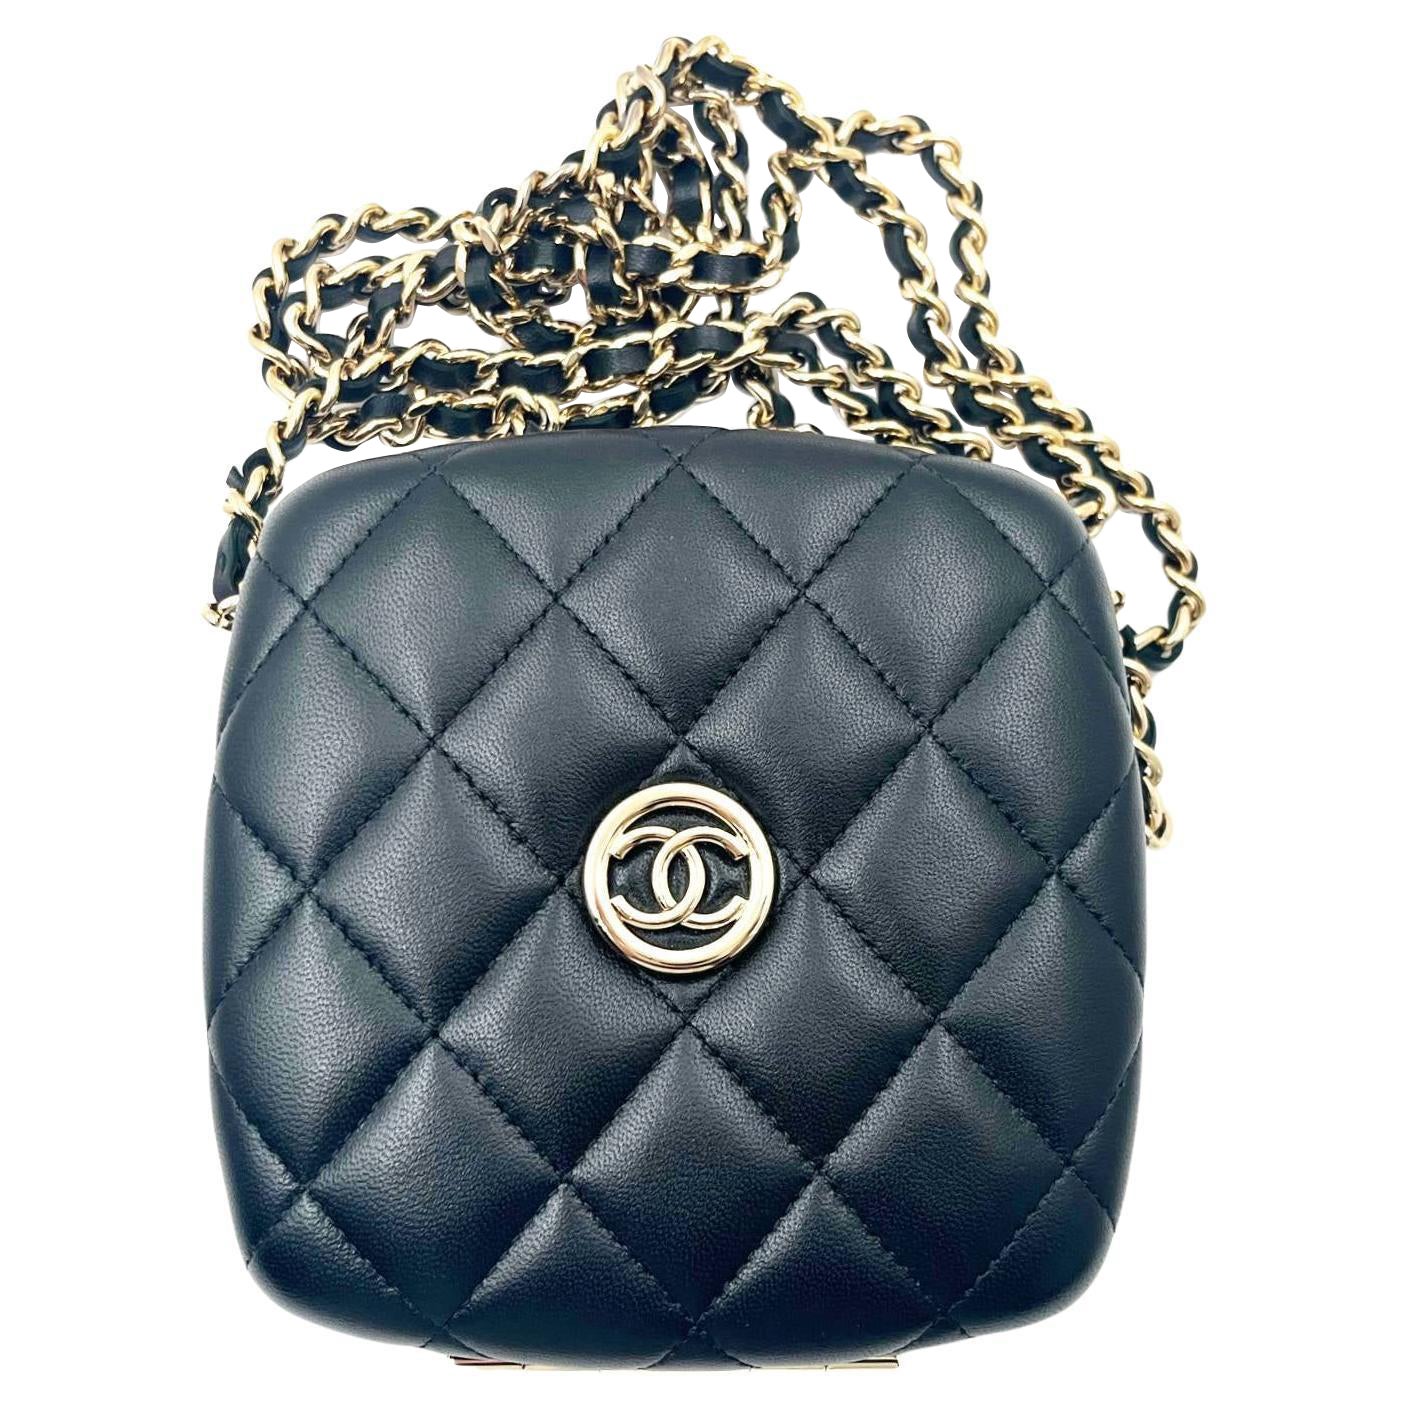 Chanel Brand New Black Quilted Hard Case Compact Vanity Crossbody Bag  im Angebot